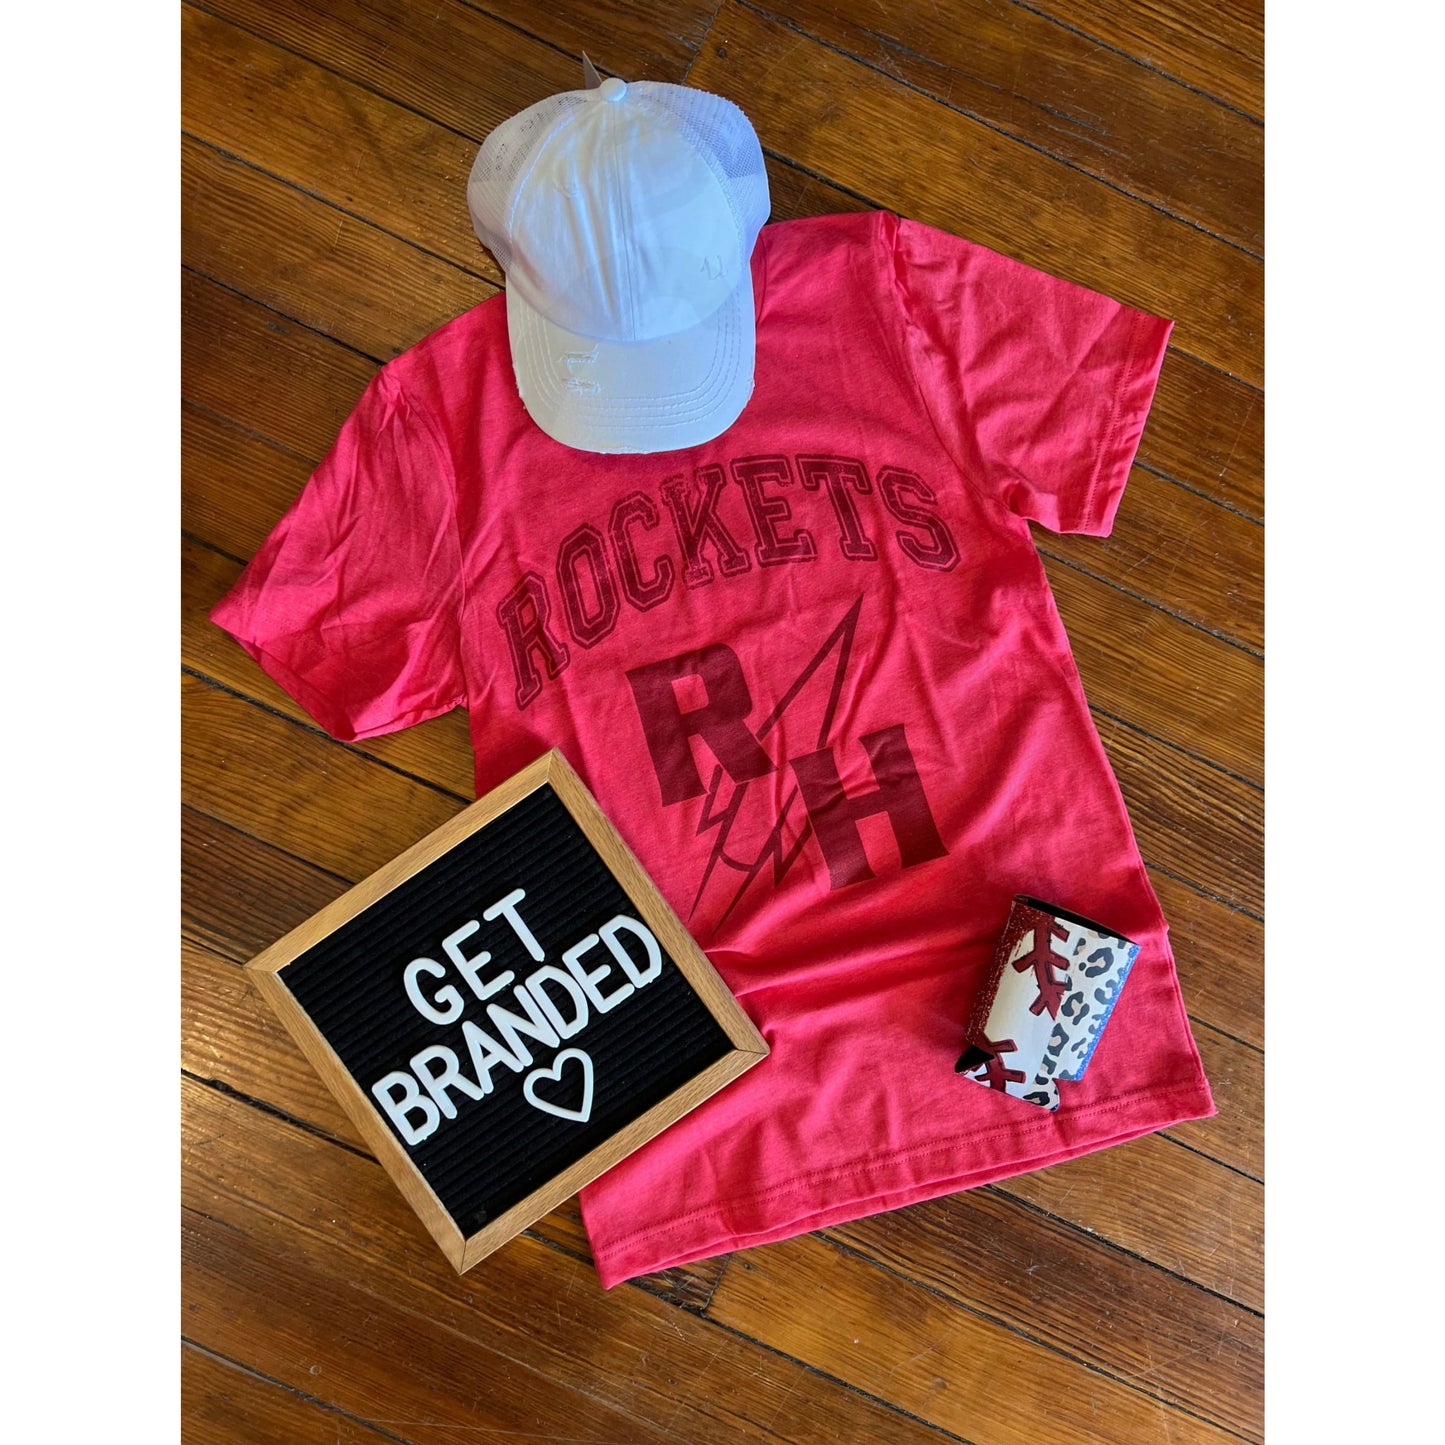 Tone on Tone Rose Hill Rockets Tee - Apparel & Accessories